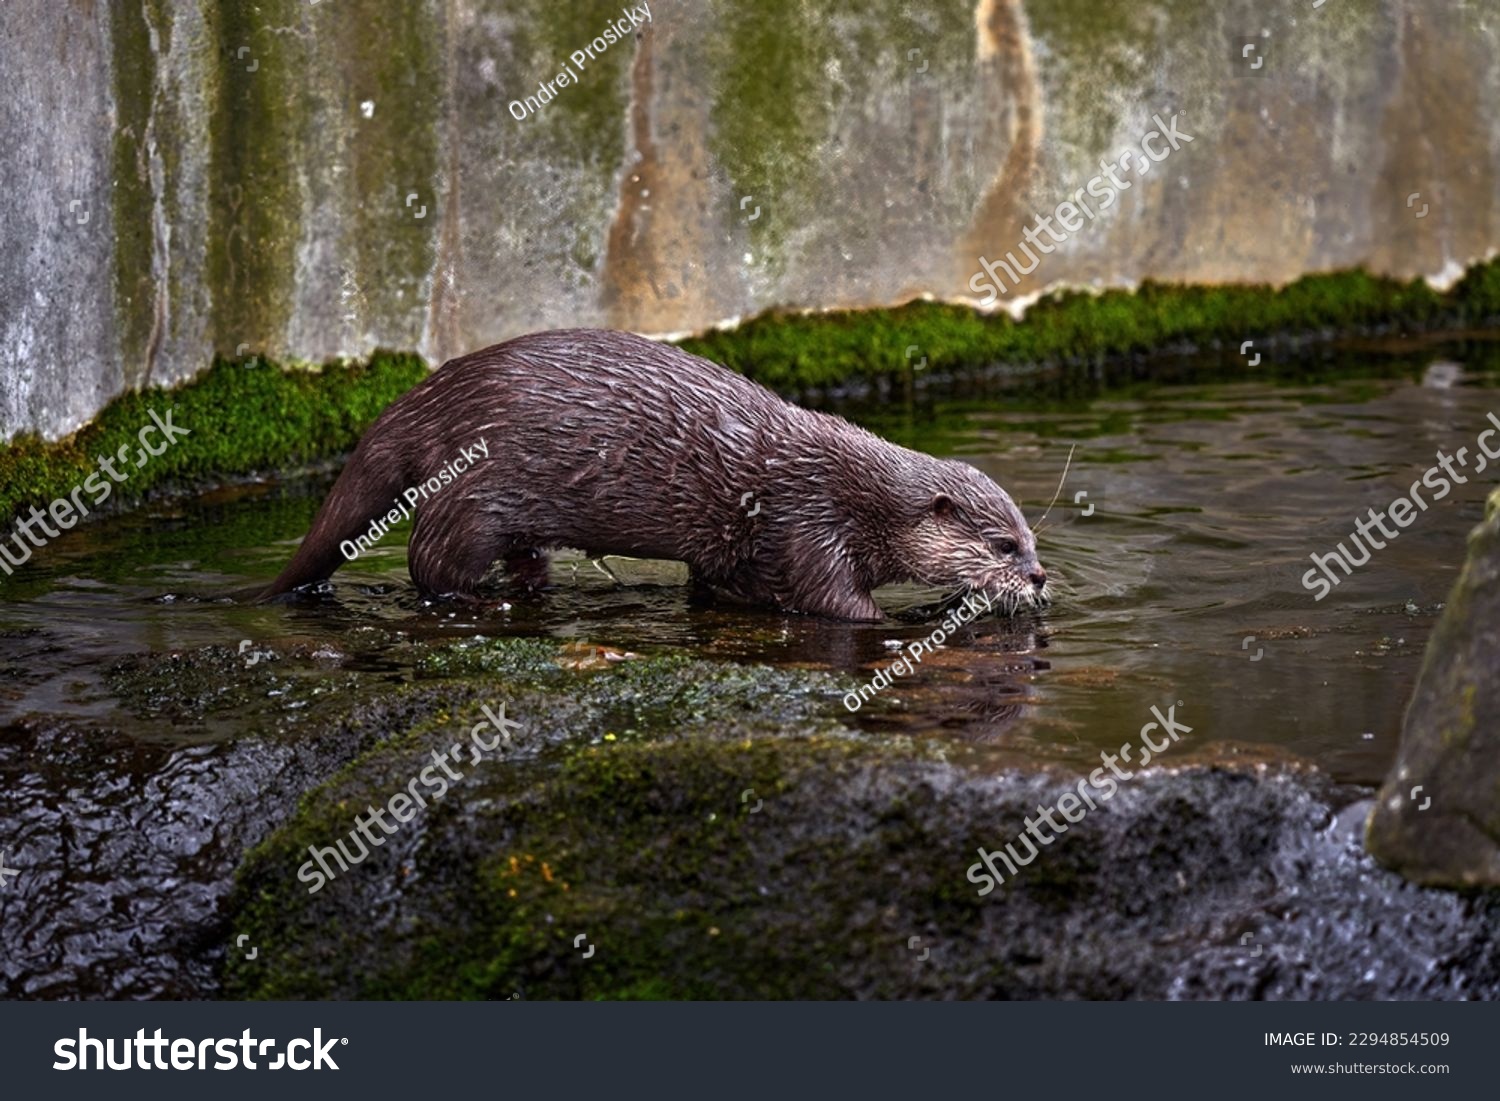 Oriental small-clawed otter, Aonyx cinereus, water mammal in the water, Kalkata, India. Urban wildlife in the town. Nature wildlife. Otter in the water, Asia. #2294854509